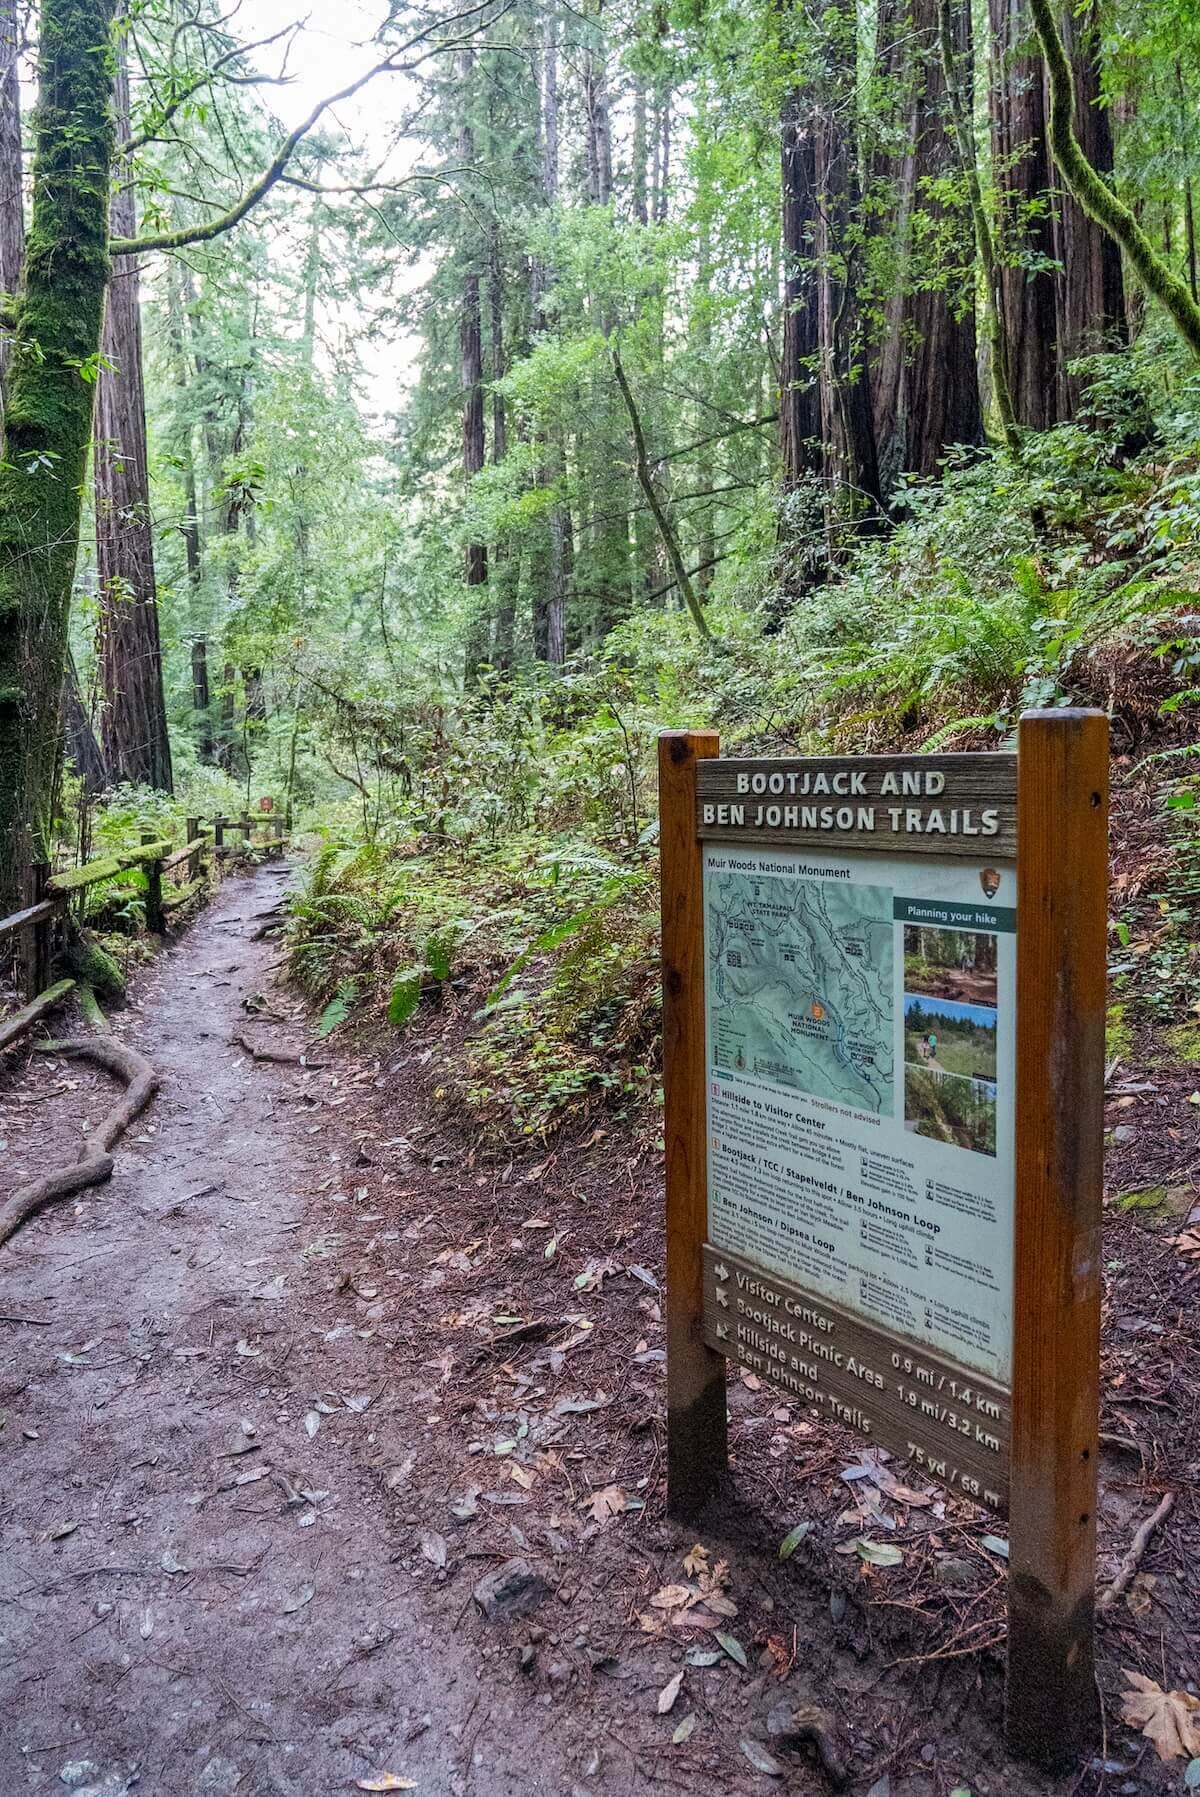 A wooden trailhead sign at the entrance to the Bootjack to Ben Johnson Loop in muir woods, with redwood trees in the background.